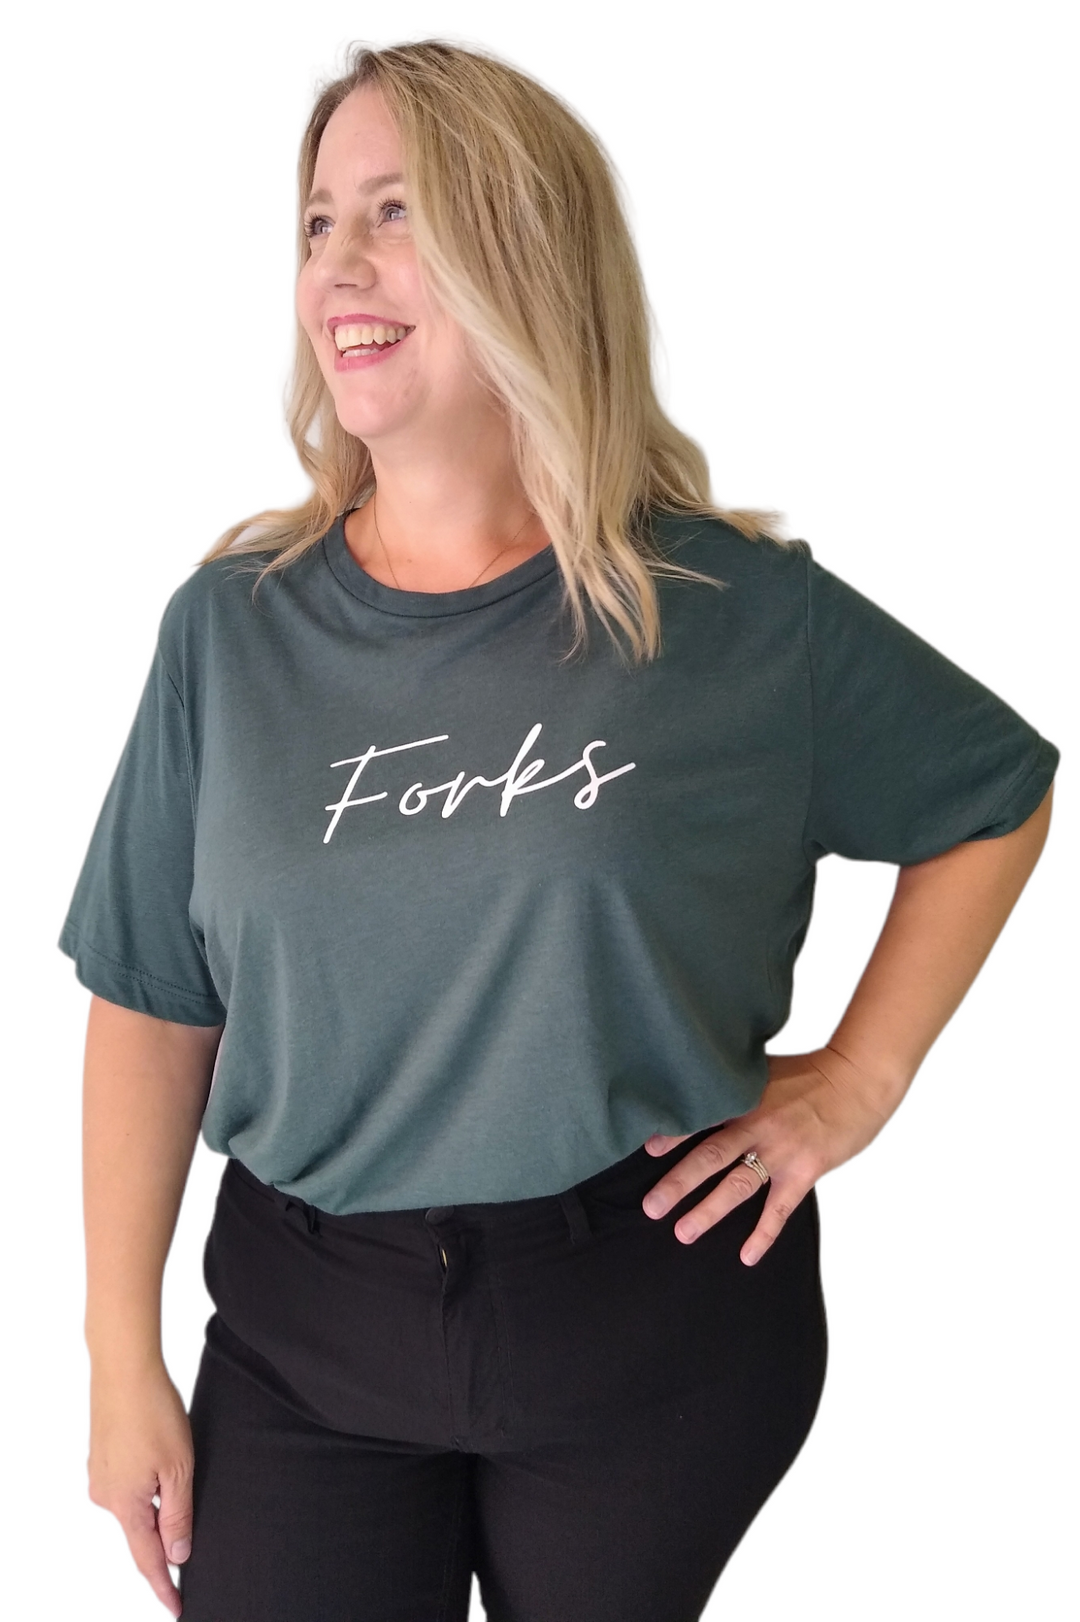 Green Forks Script Graphic Tee